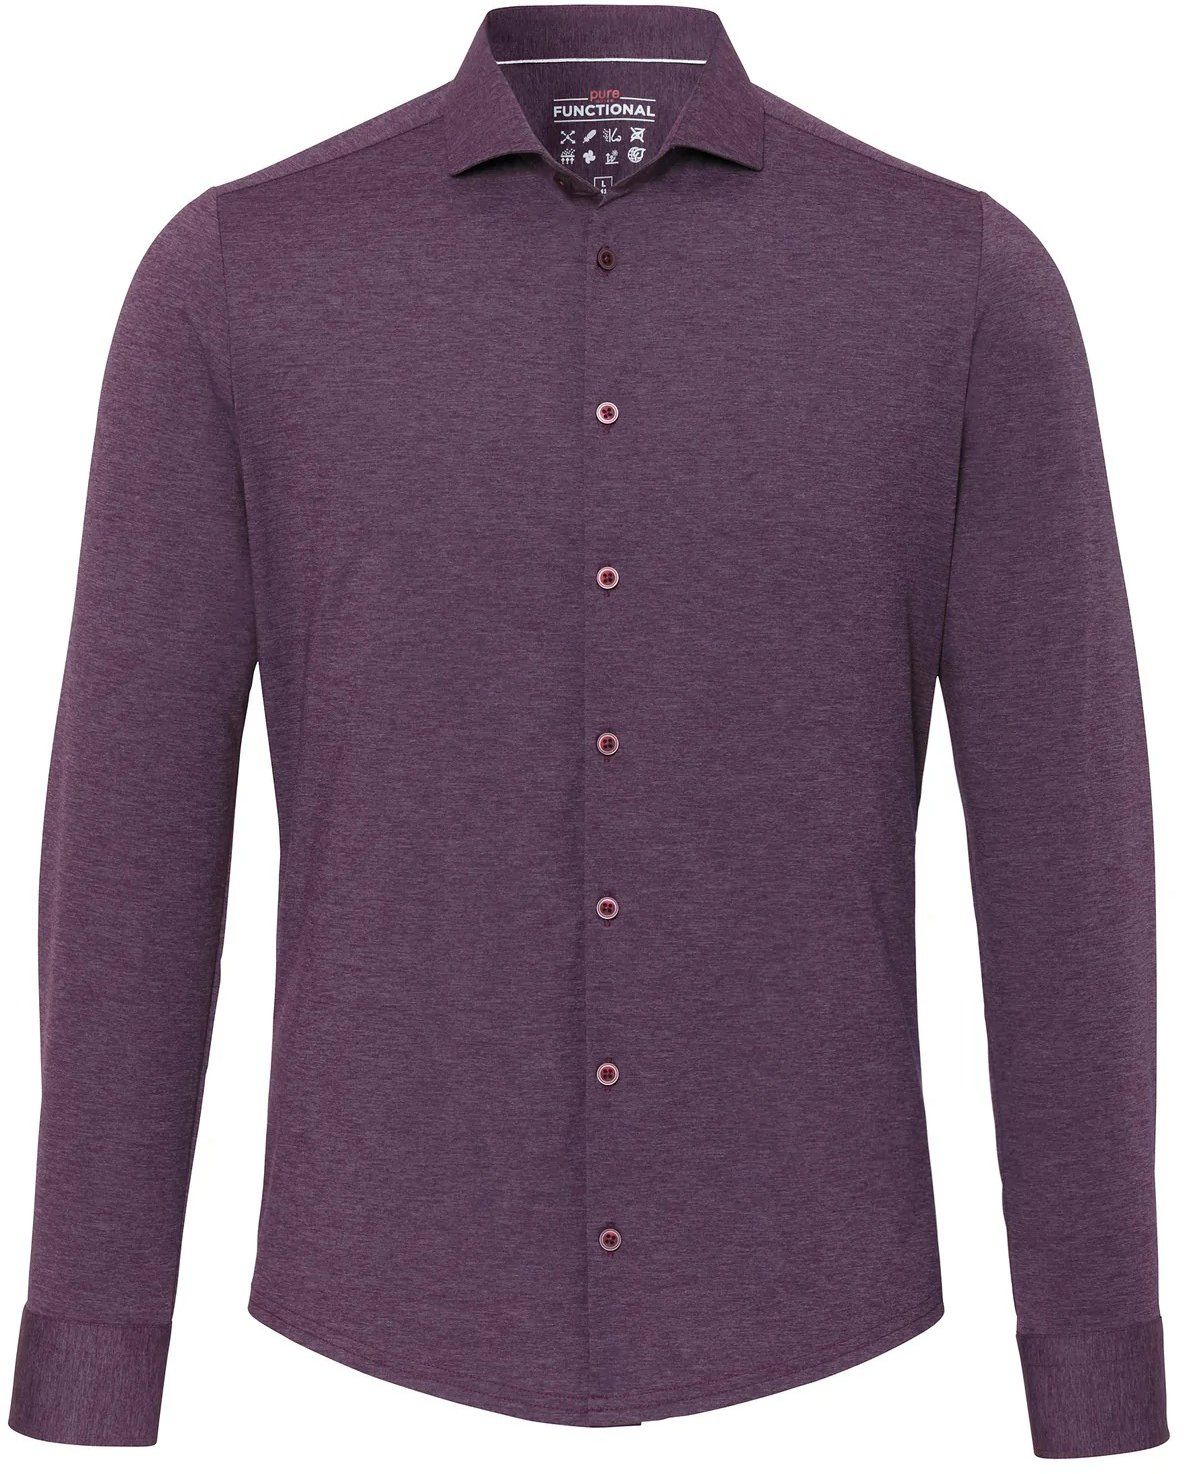 Pure The Functional Shirt Aubergine Purple size 15